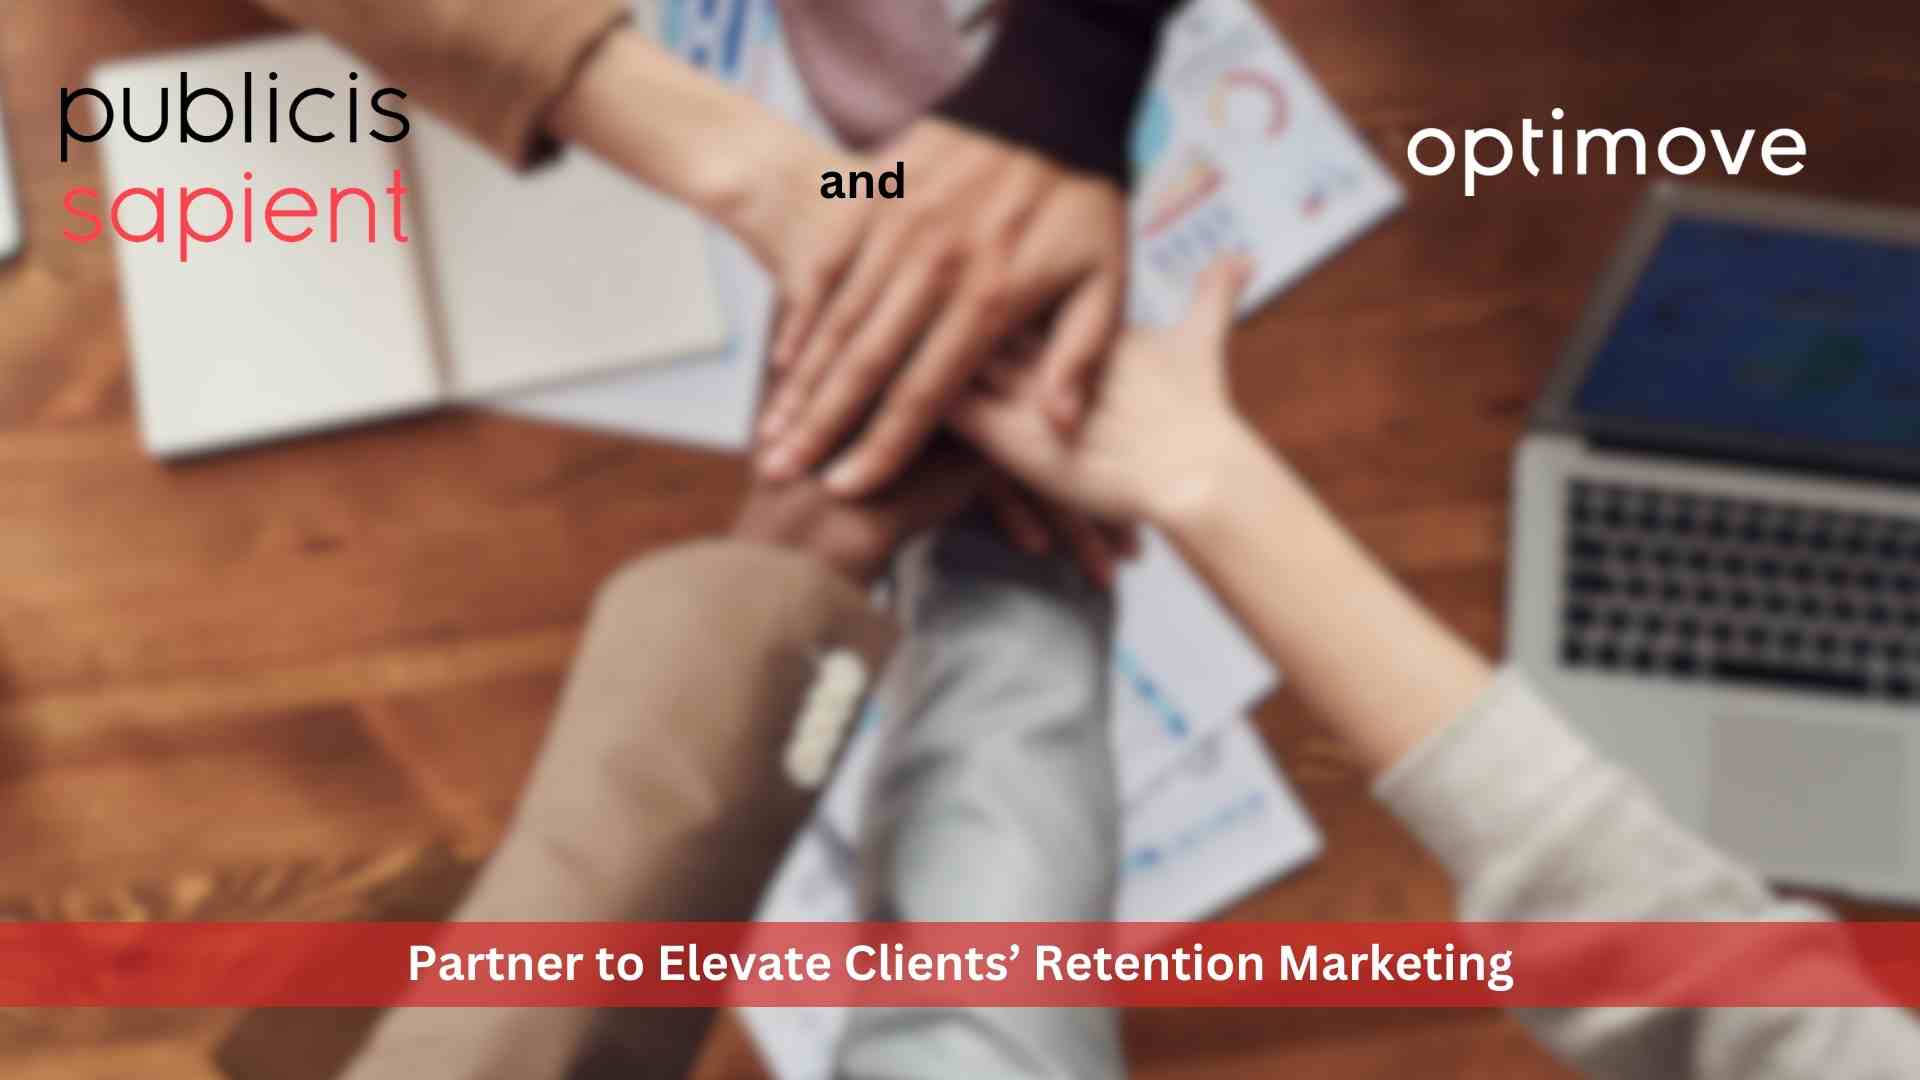 Publicis Sapient and Optimove Partner to Elevate Clients’ Retention Marketing as Part of Digital Transformation